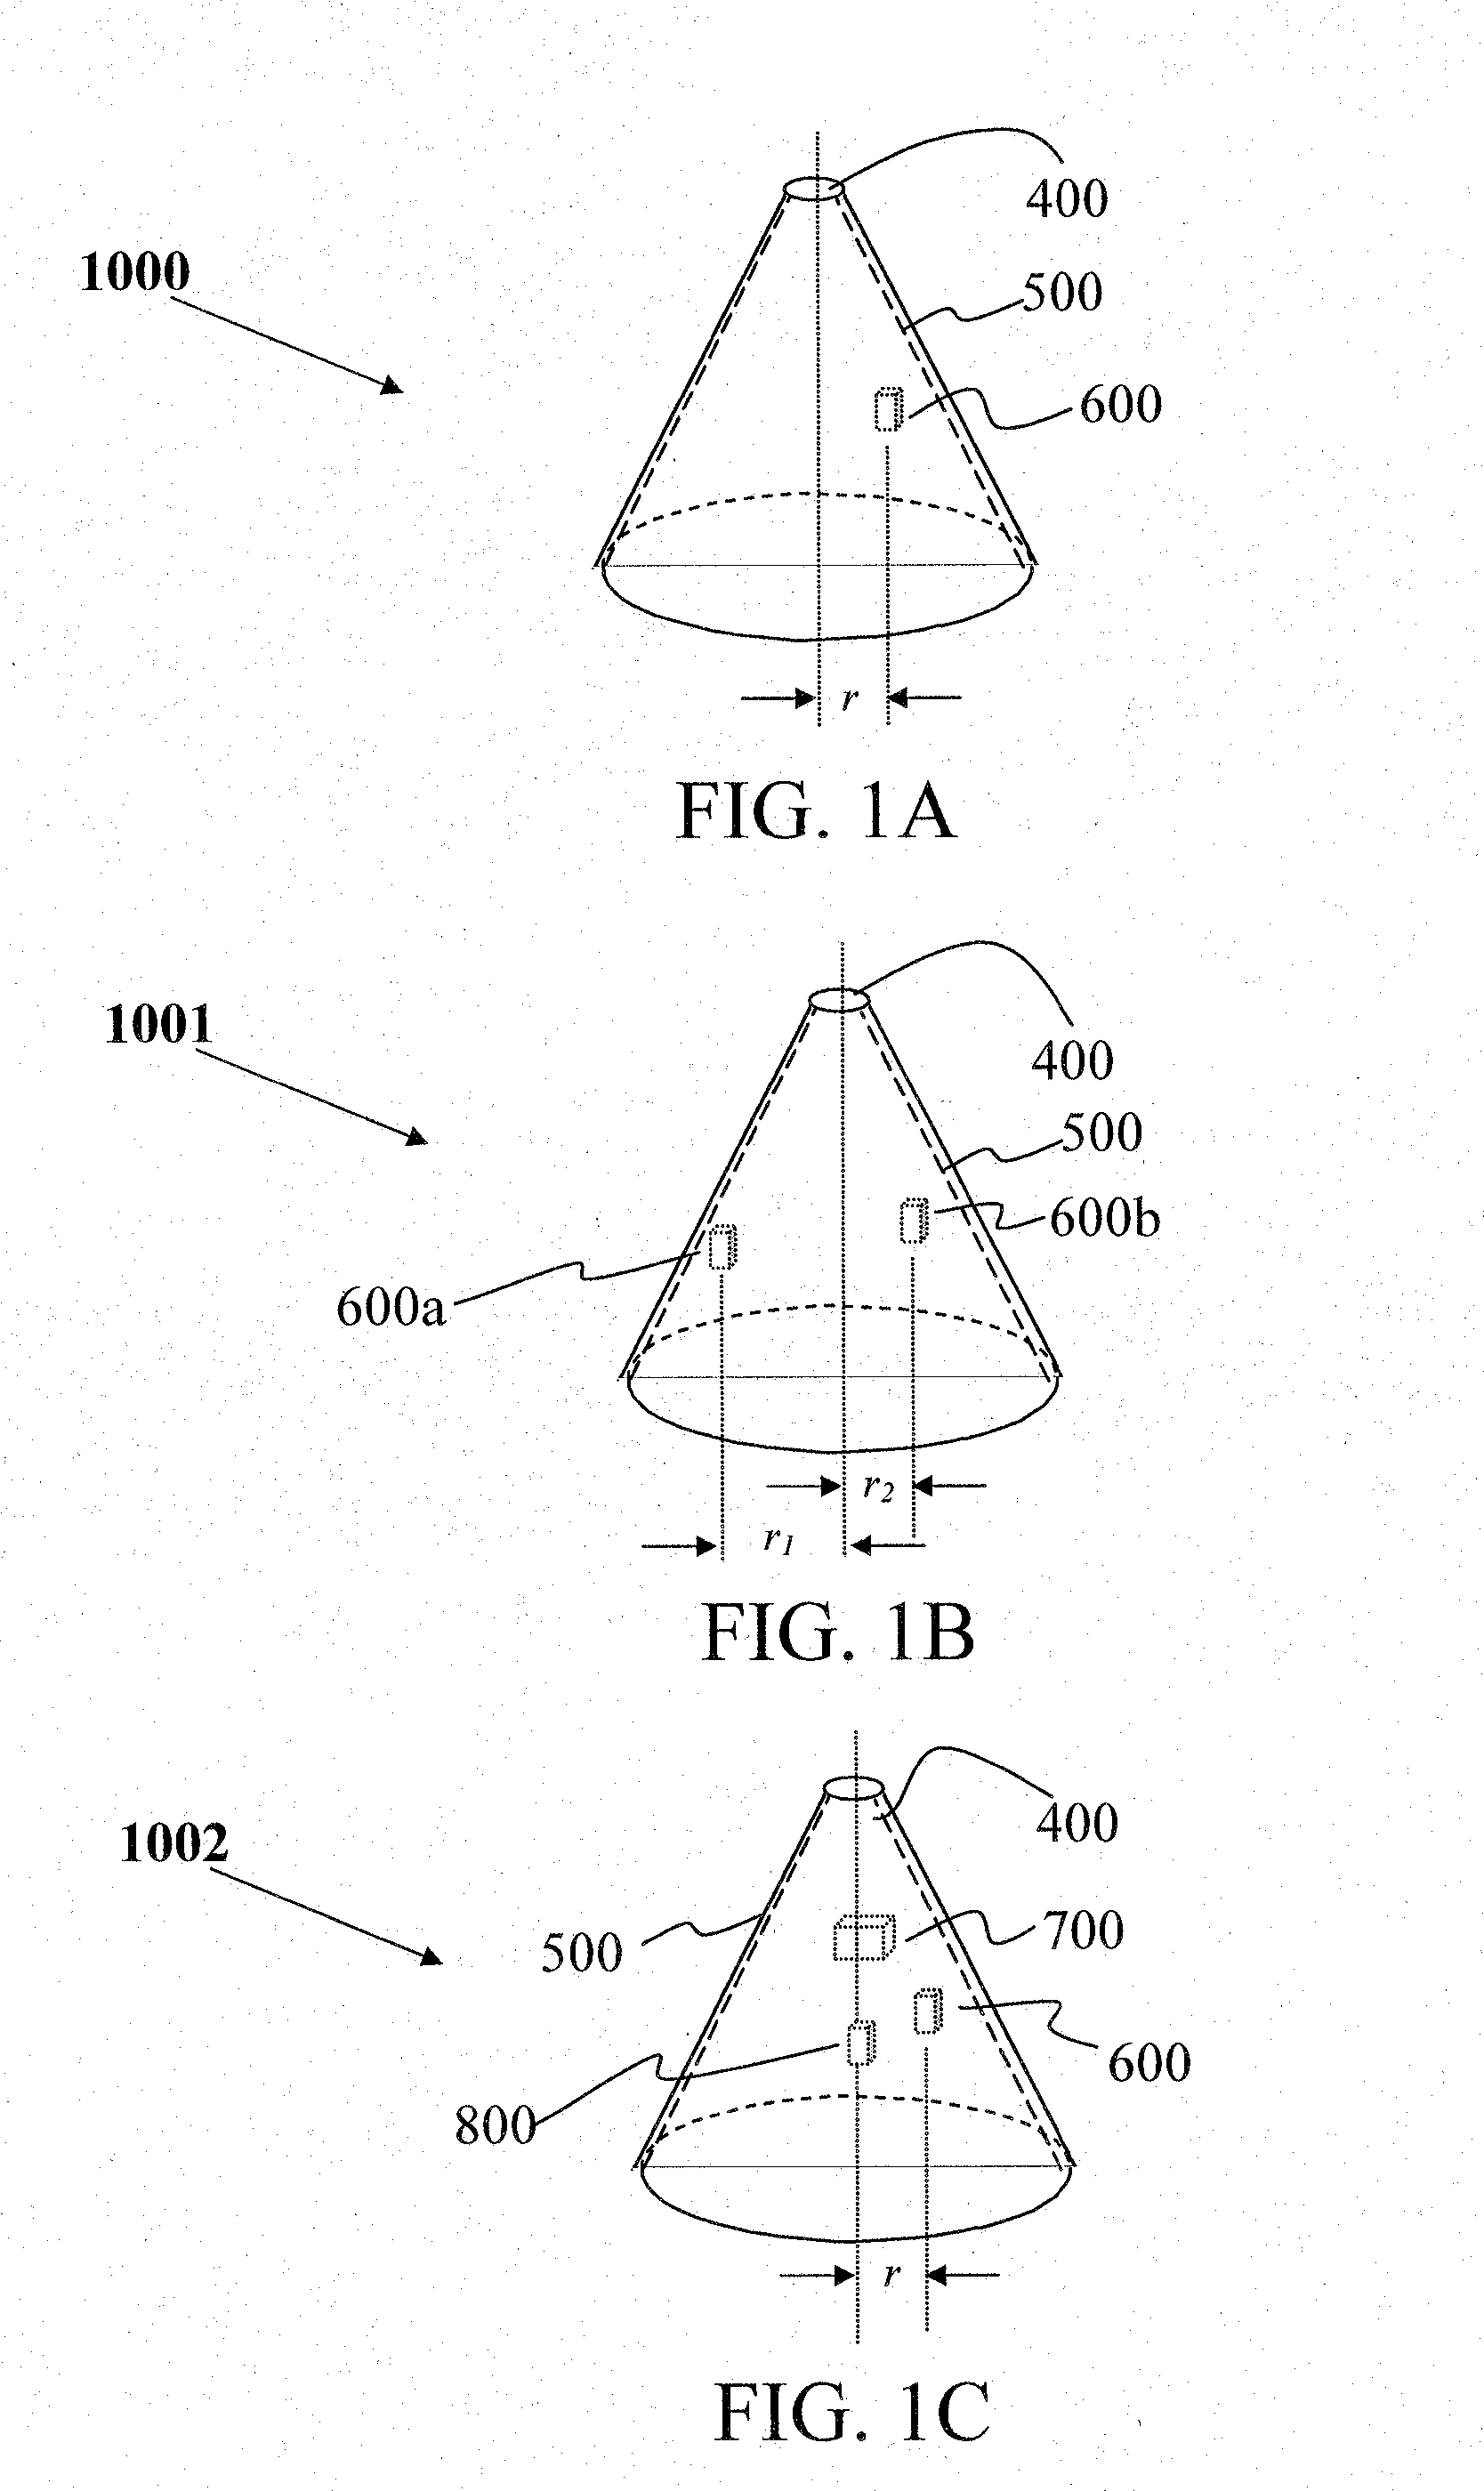 System and method for measuring parameters of motion of a projectile as it exits the muzzle of a gun